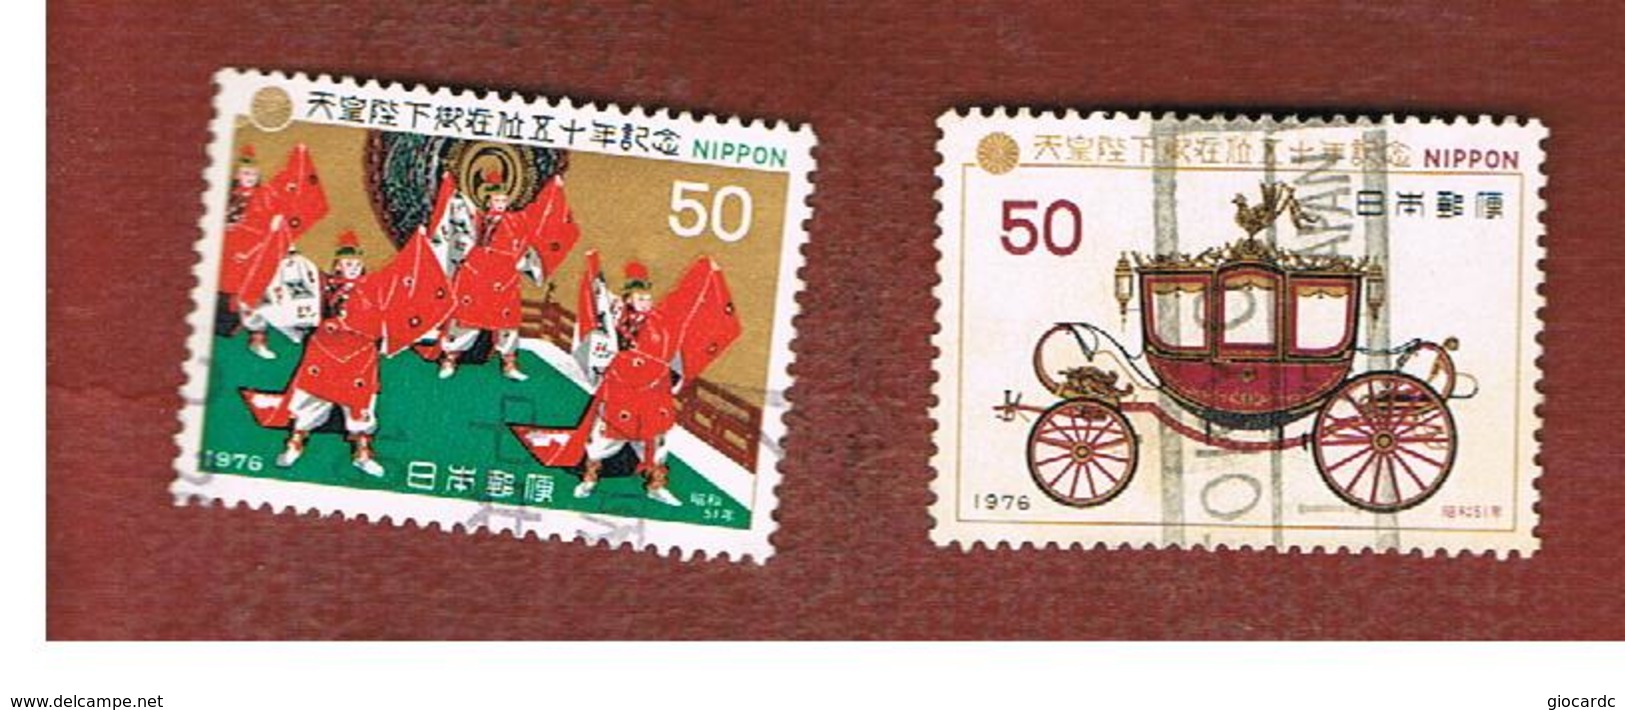 GIAPPONE  (JAPAN) - SG 1438.1439 -   1976  GOLDEN JUBILEE OF EMPEROR ACCESSION (COMPLET SET OF 2)  - USED° - Usati